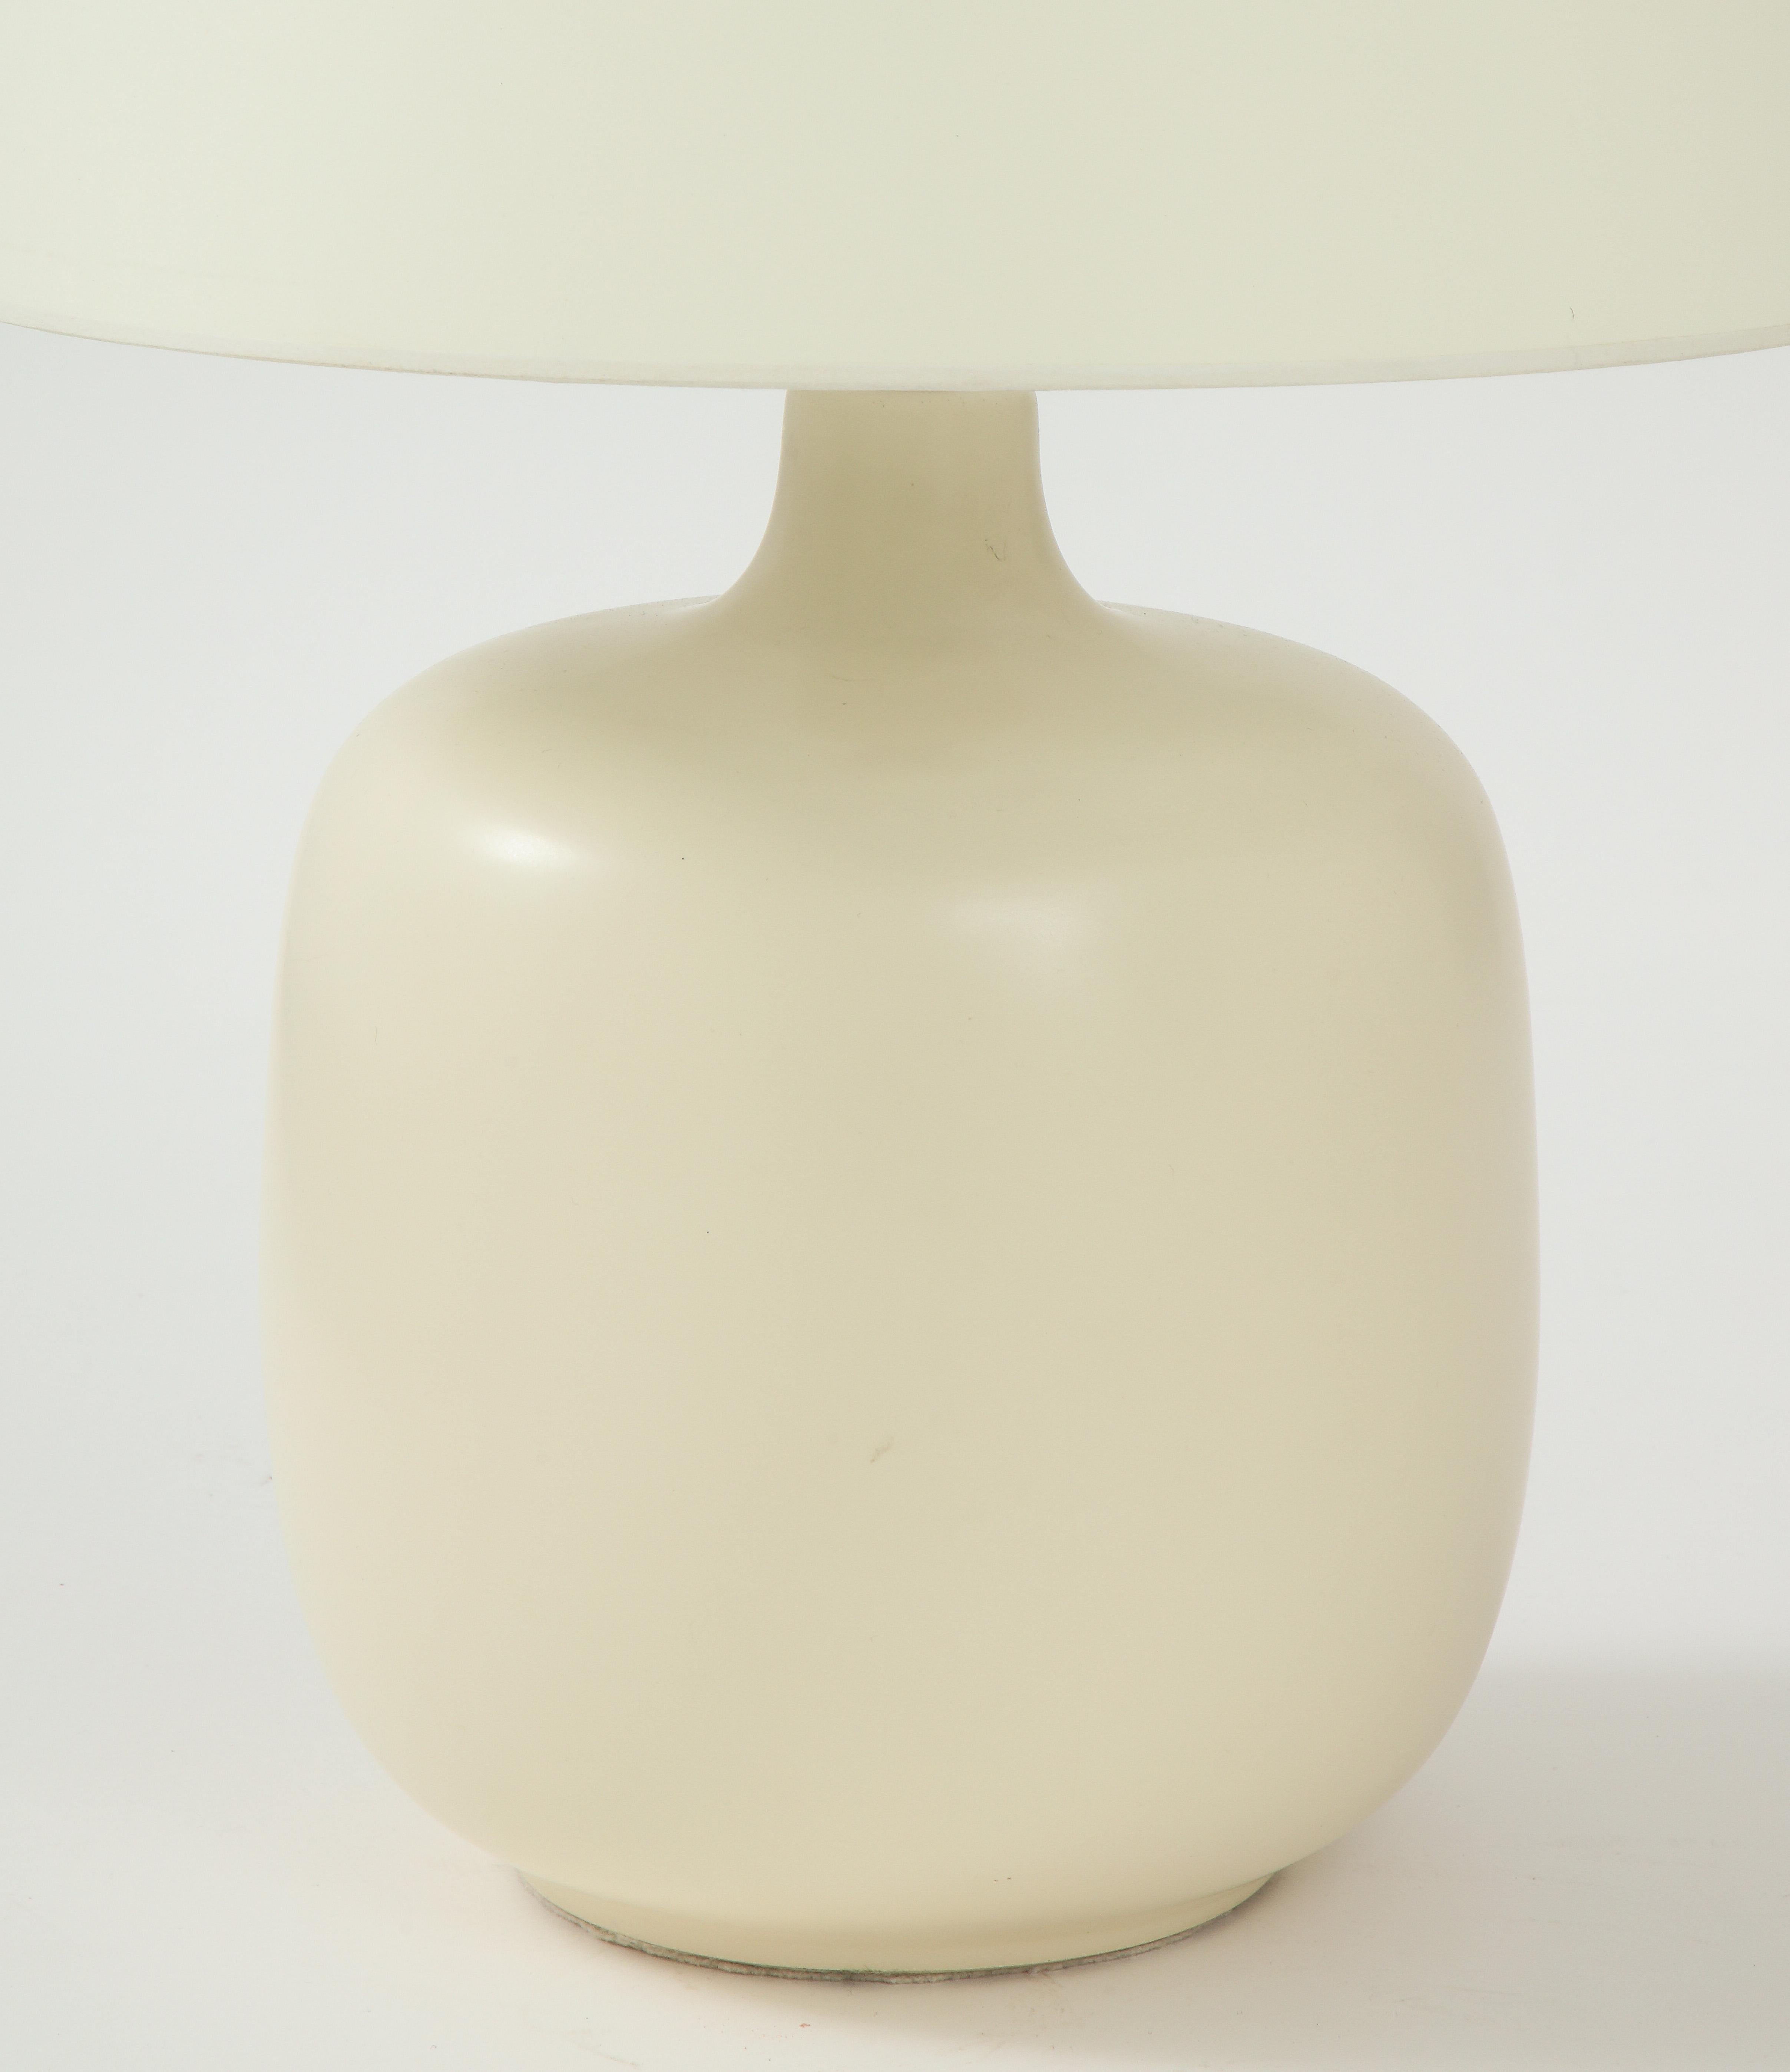 White ceramic Lotte & Gunnar Bostlund lamp with custom parchment shade, circa 1950
Bronze hardware
Newly wired, silk twist cord

Measures: Total height 25 in, vessel height 12.5, vessel diameter .9.75 in.